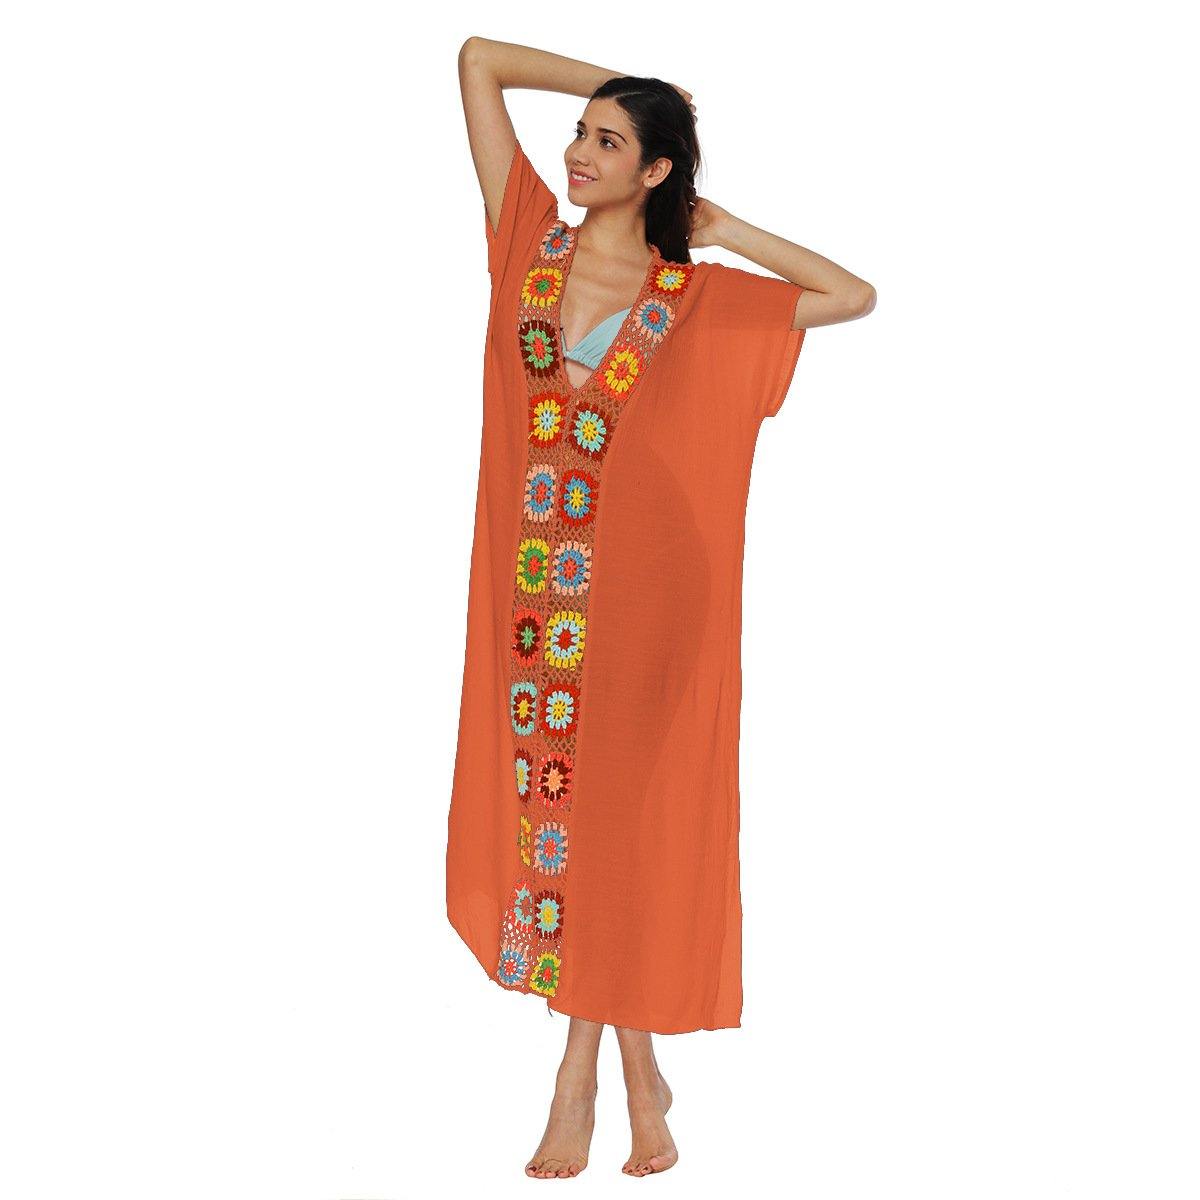 Women Long Summer Beach Cover Ups-Cover Ups-Orange-One Size-Free Shipping Leatheretro